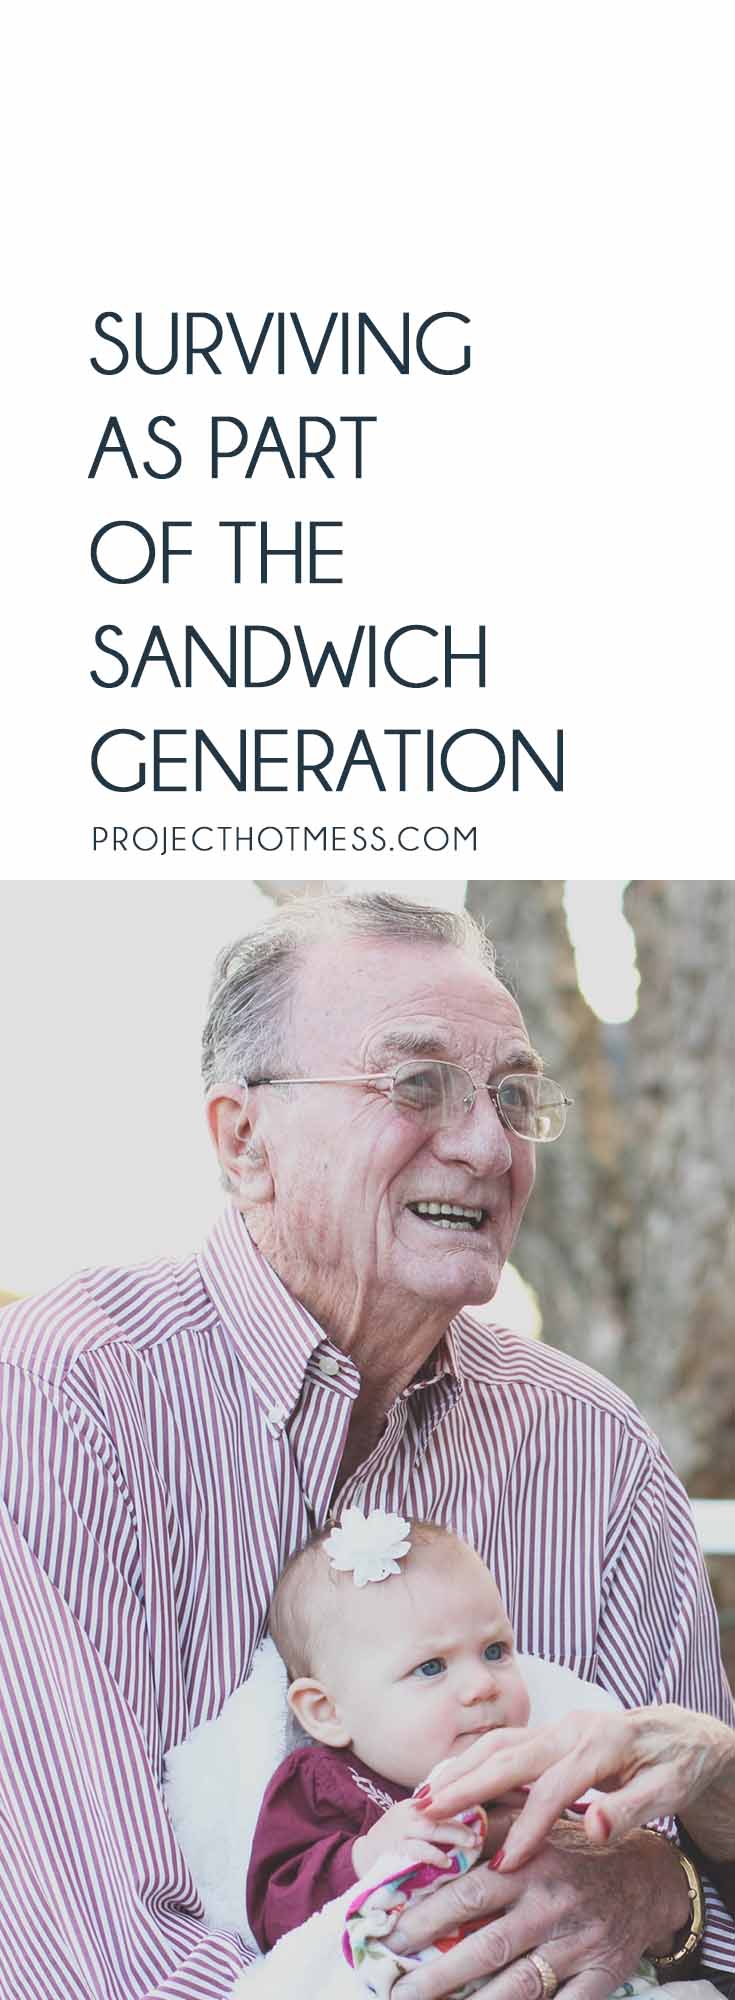 Do you know about the Sandwich Generation? You may very well be part of it. And surviving is tough - there's so much demand on your time and so much stress. Here's how you can get through it.